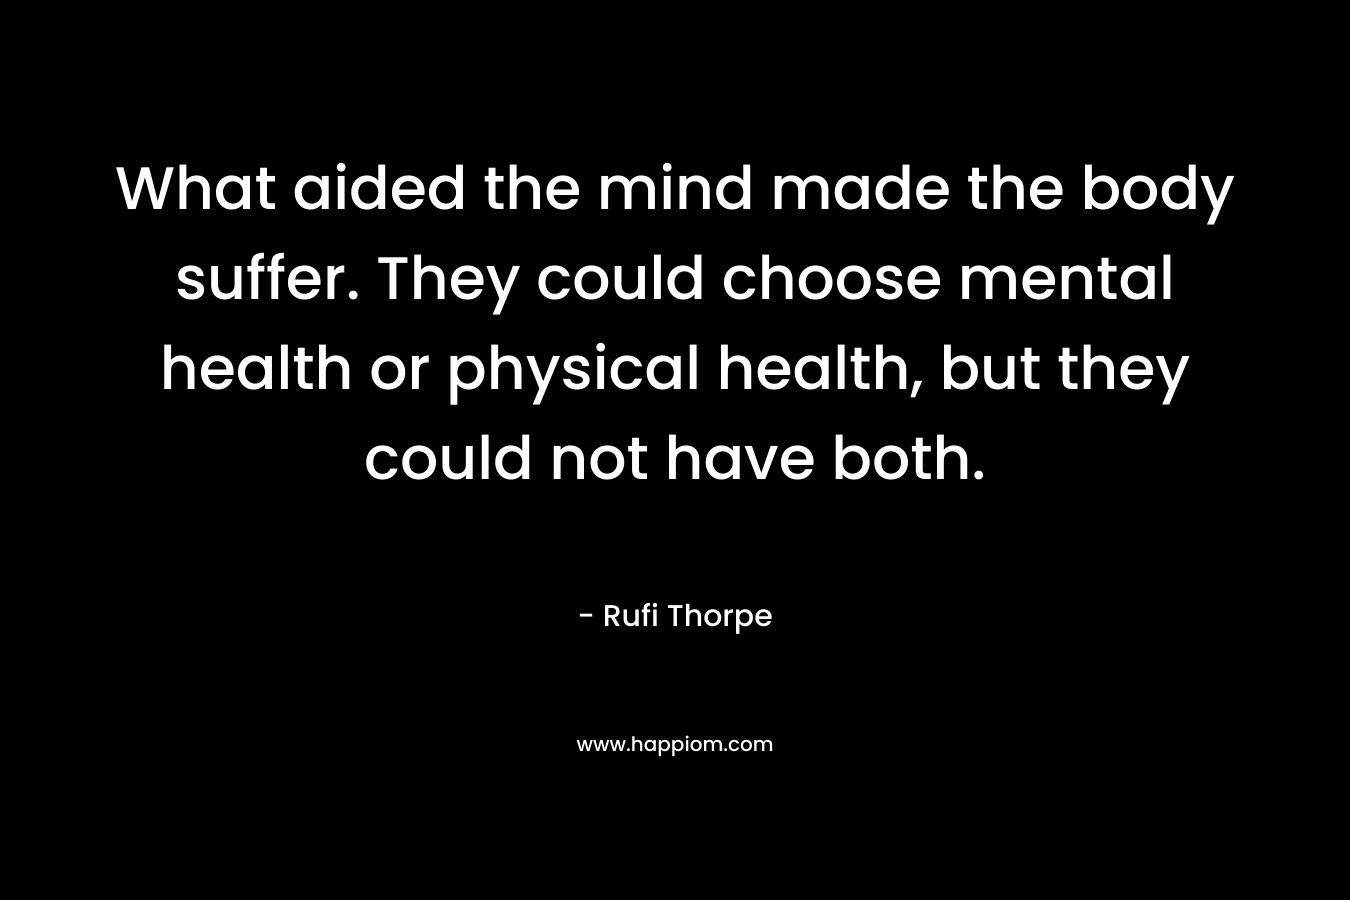 What aided the mind made the body suffer. They could choose mental health or physical health, but they could not have both. – Rufi Thorpe